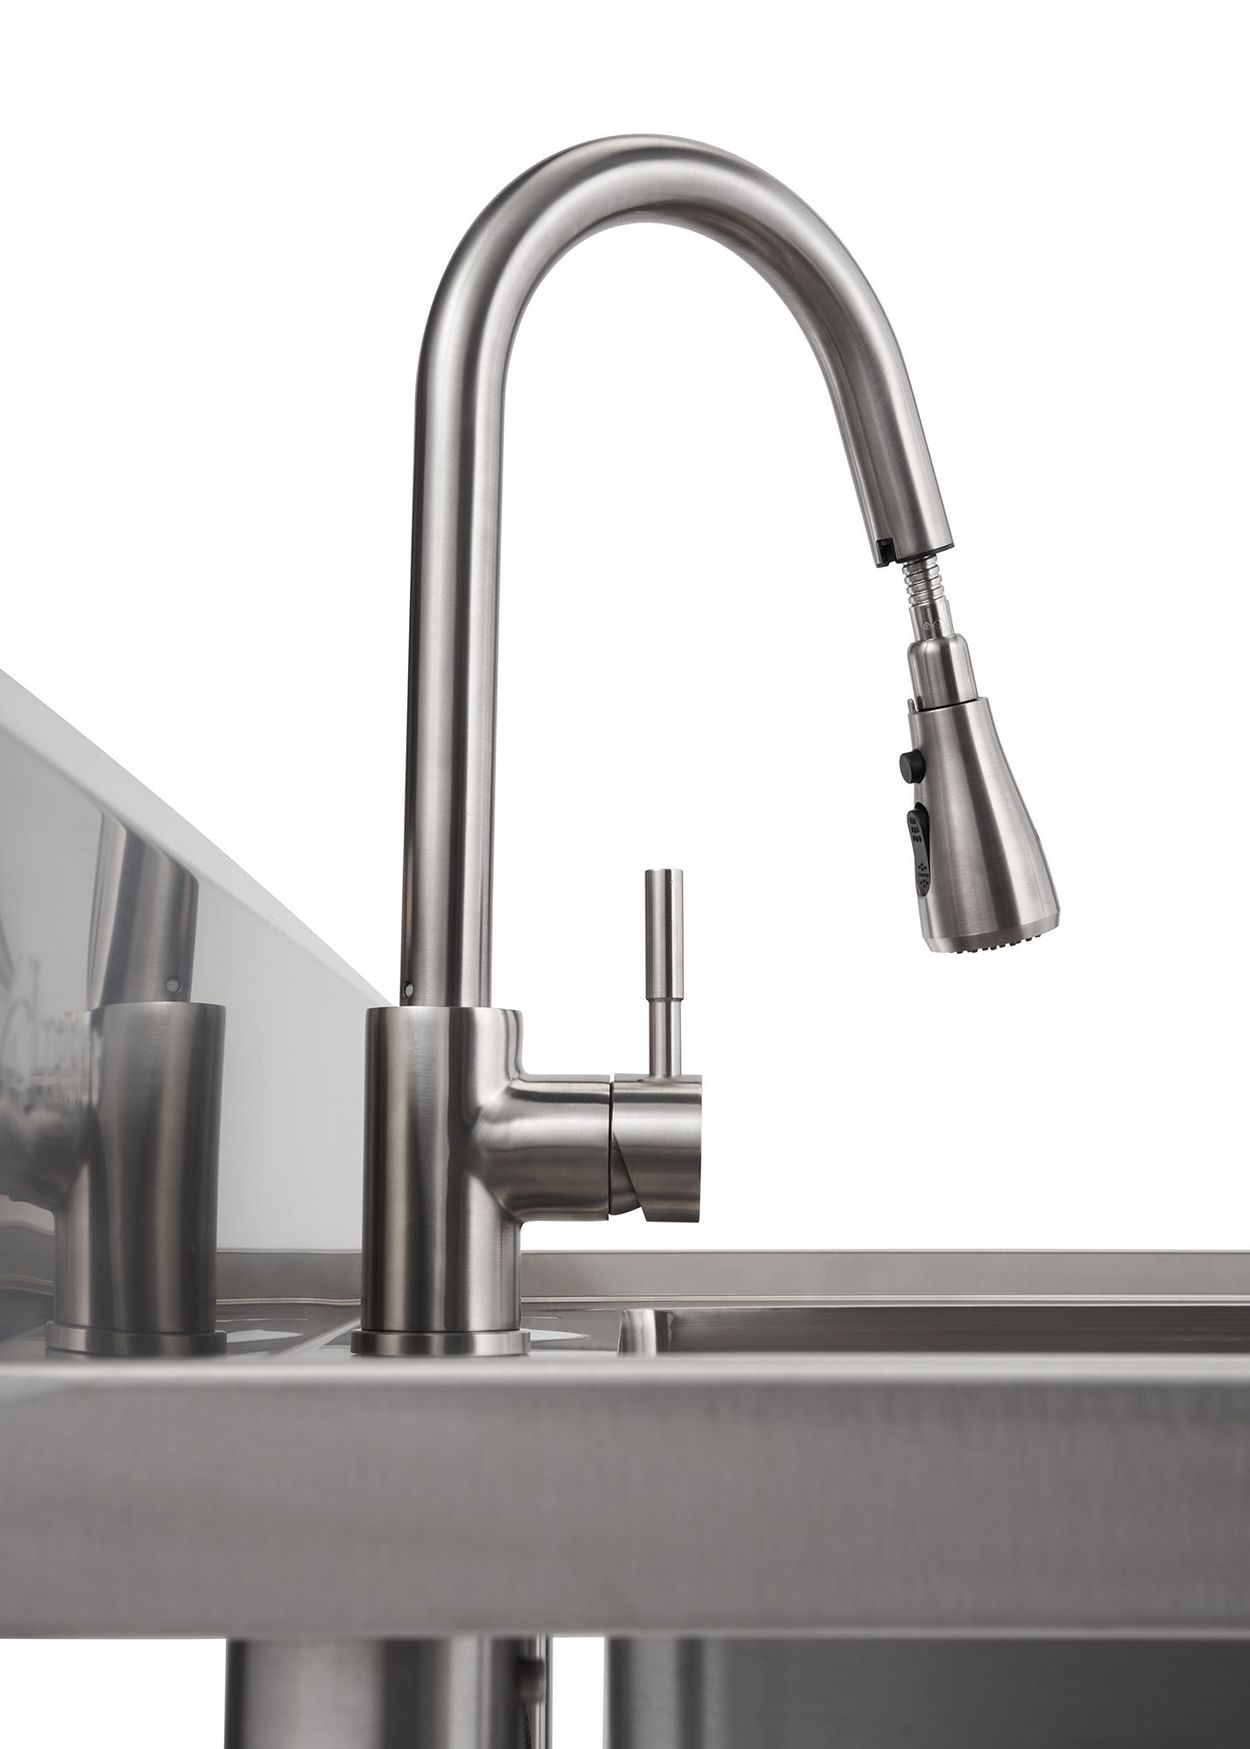 Stainless Steel Faucet with pullout functionality